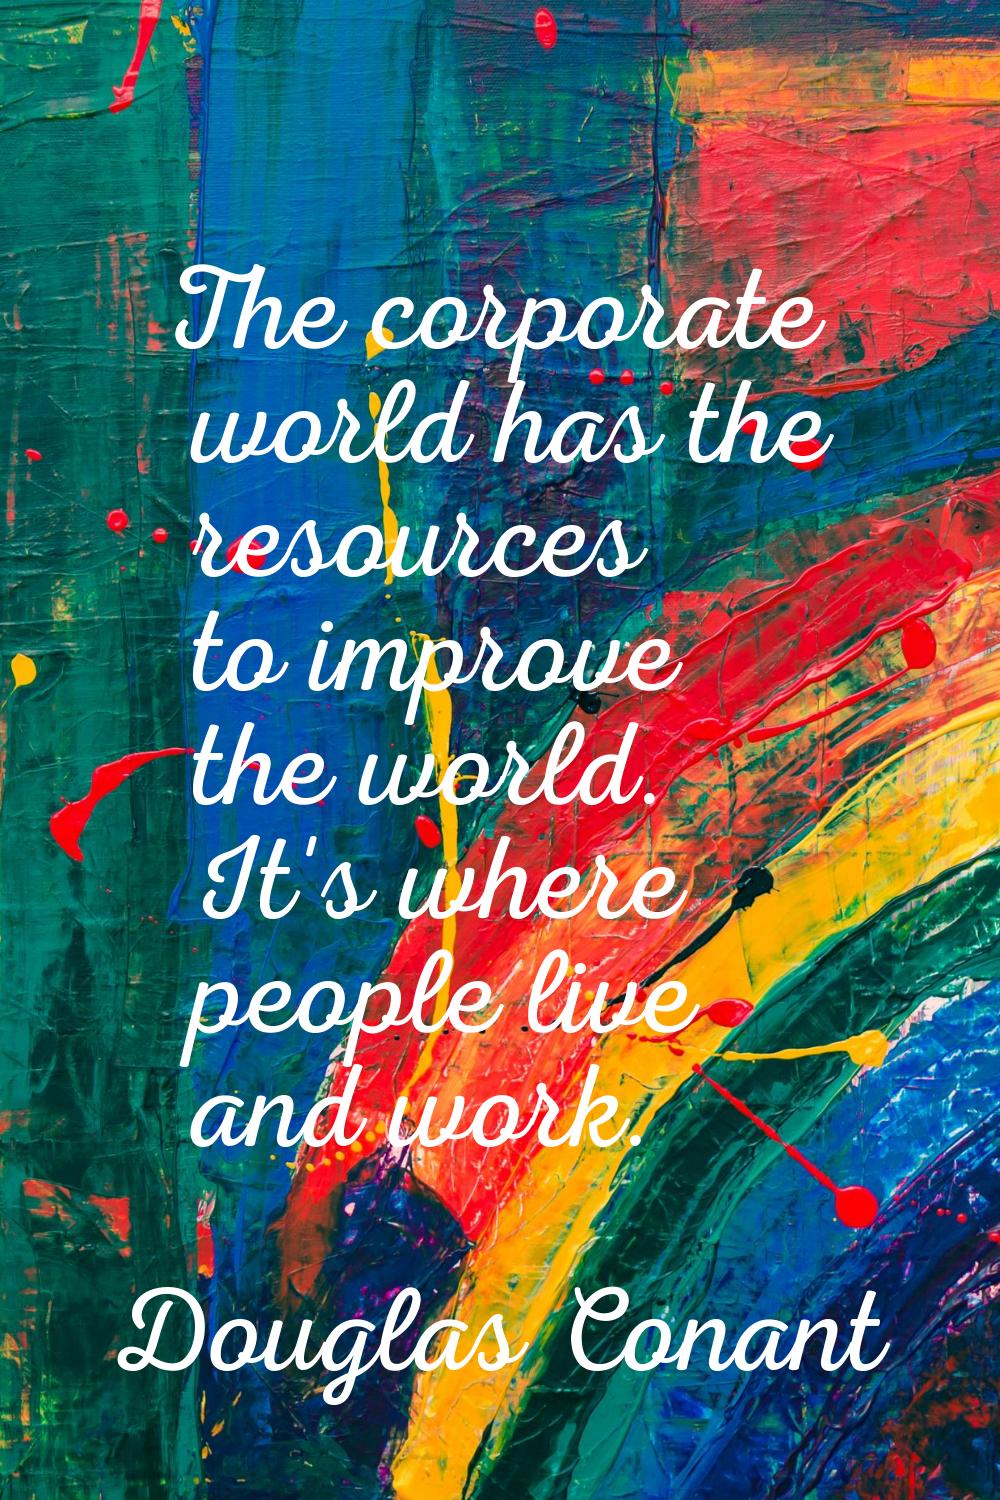 The corporate world has the resources to improve the world. It's where people live and work.